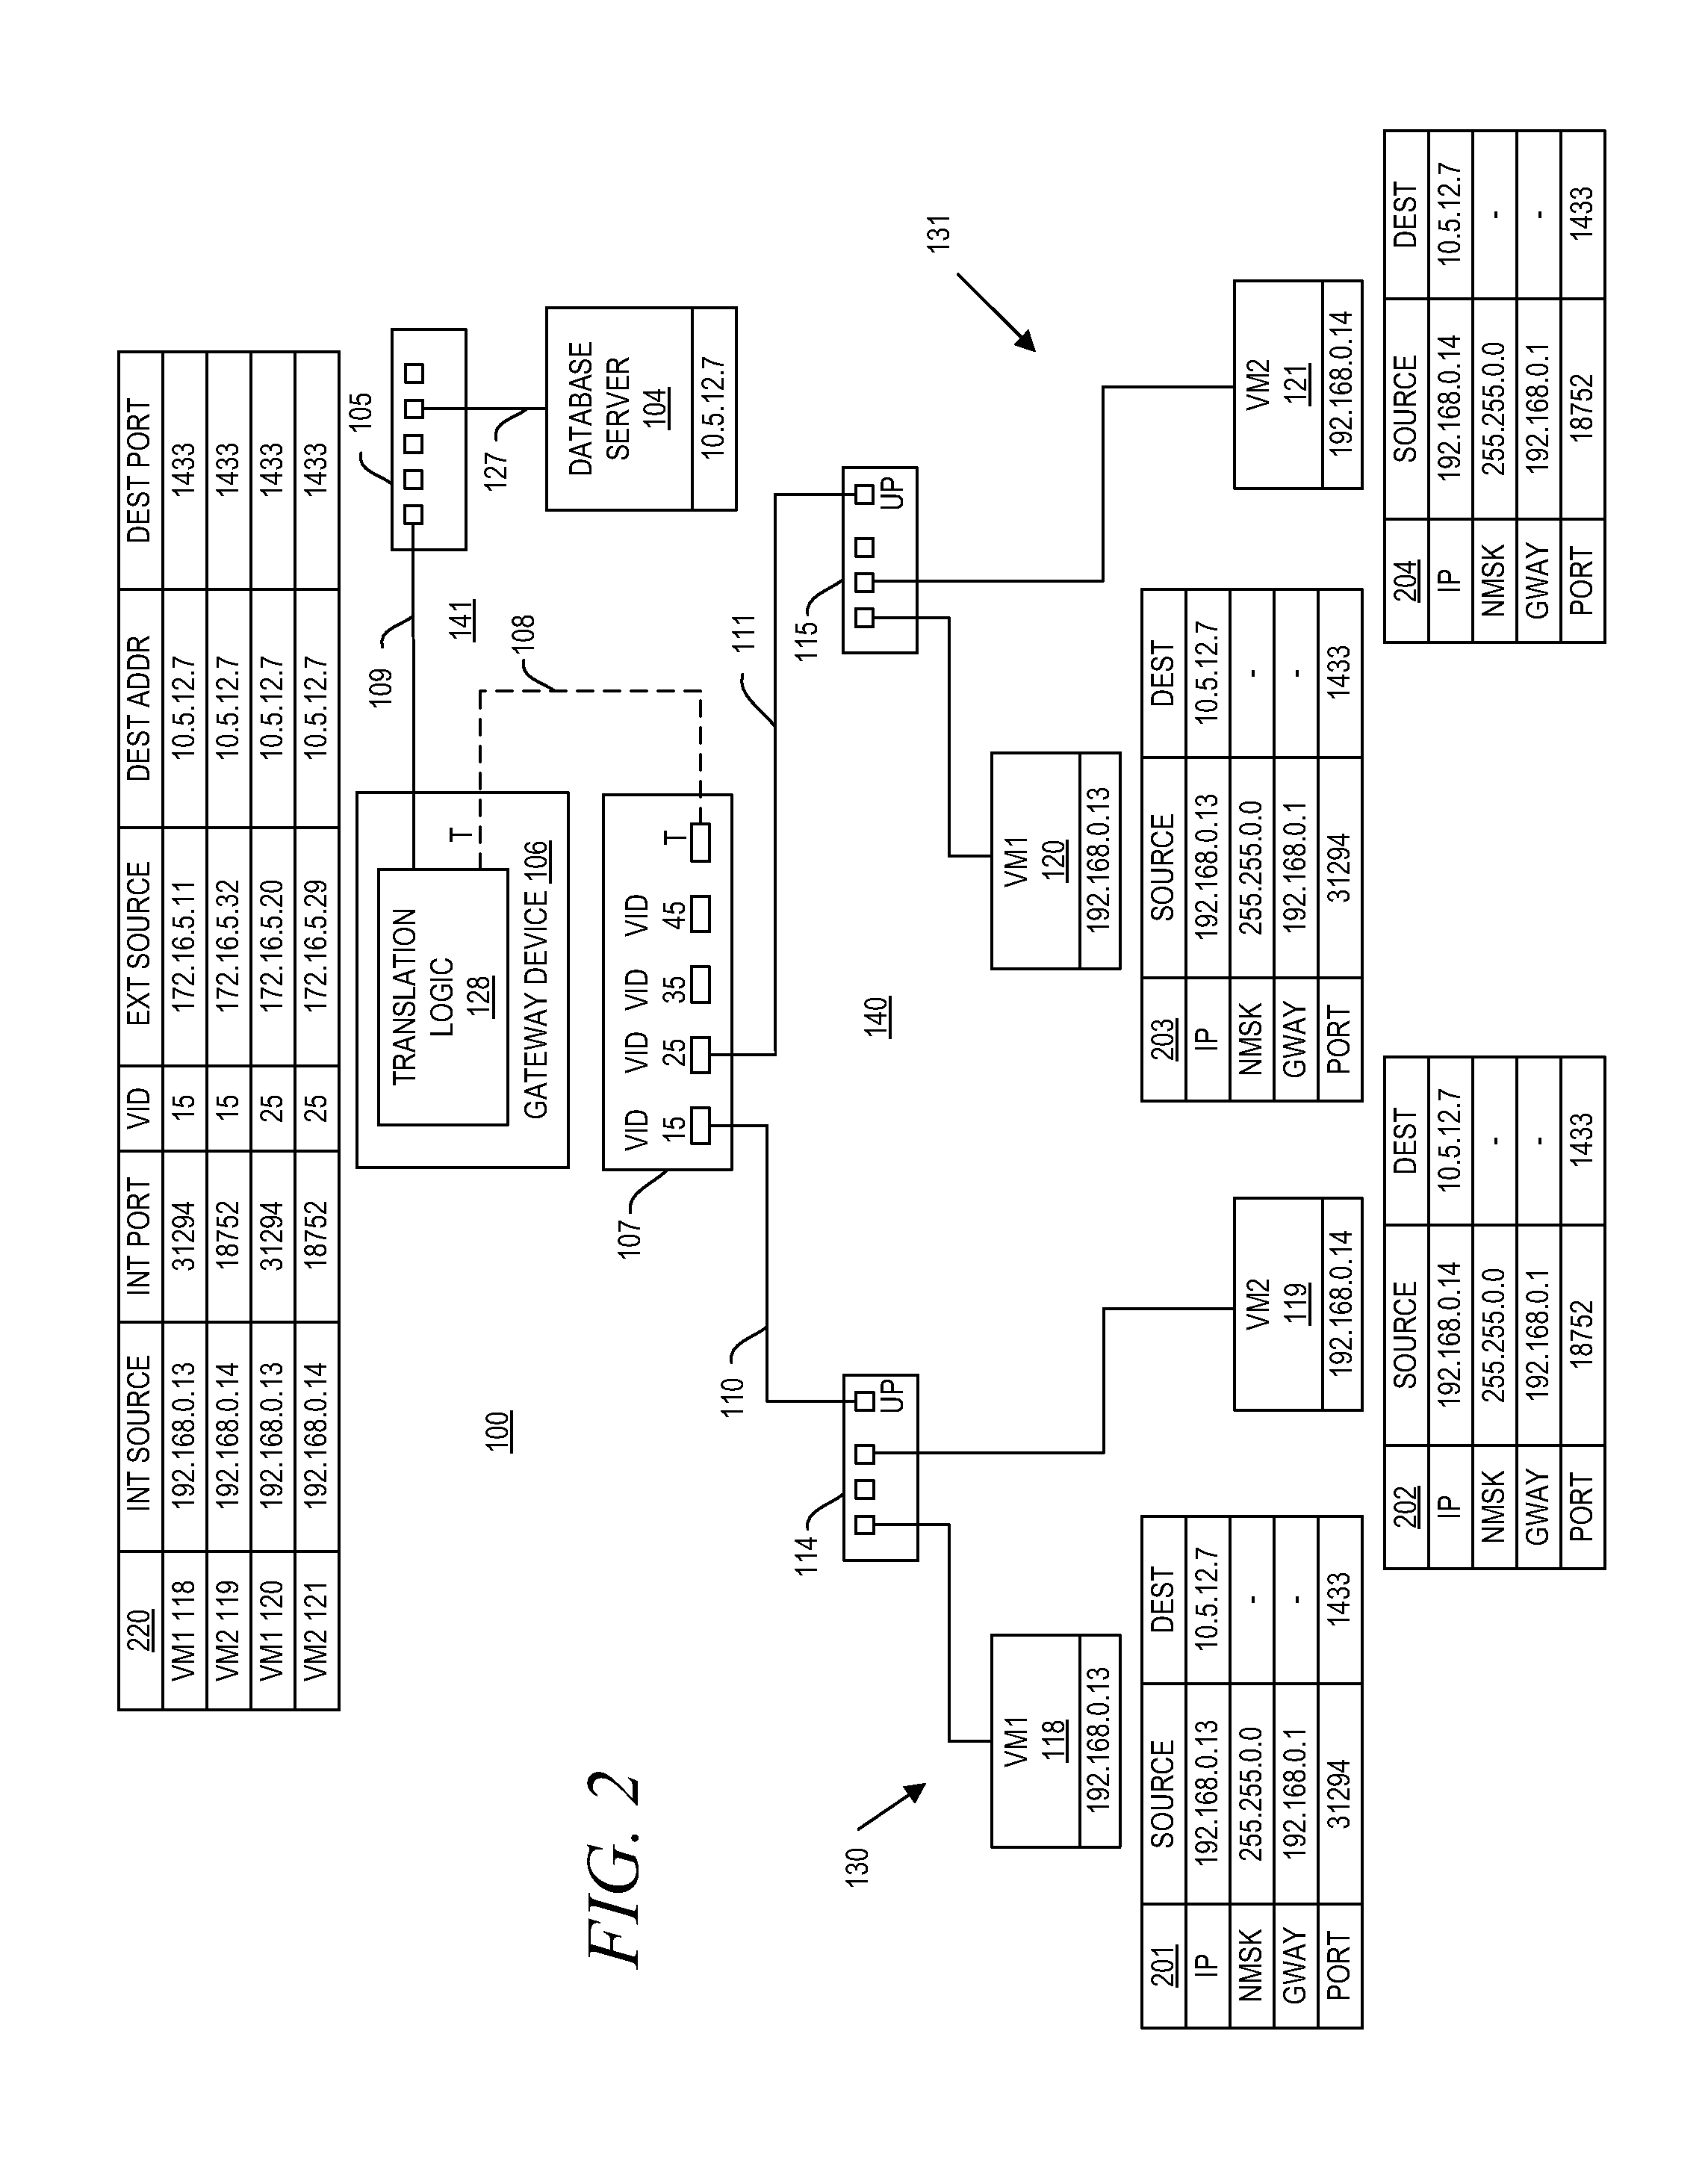 System and method for aggregating communications and for translating between overlapping internal network addresses and unique external network addresses